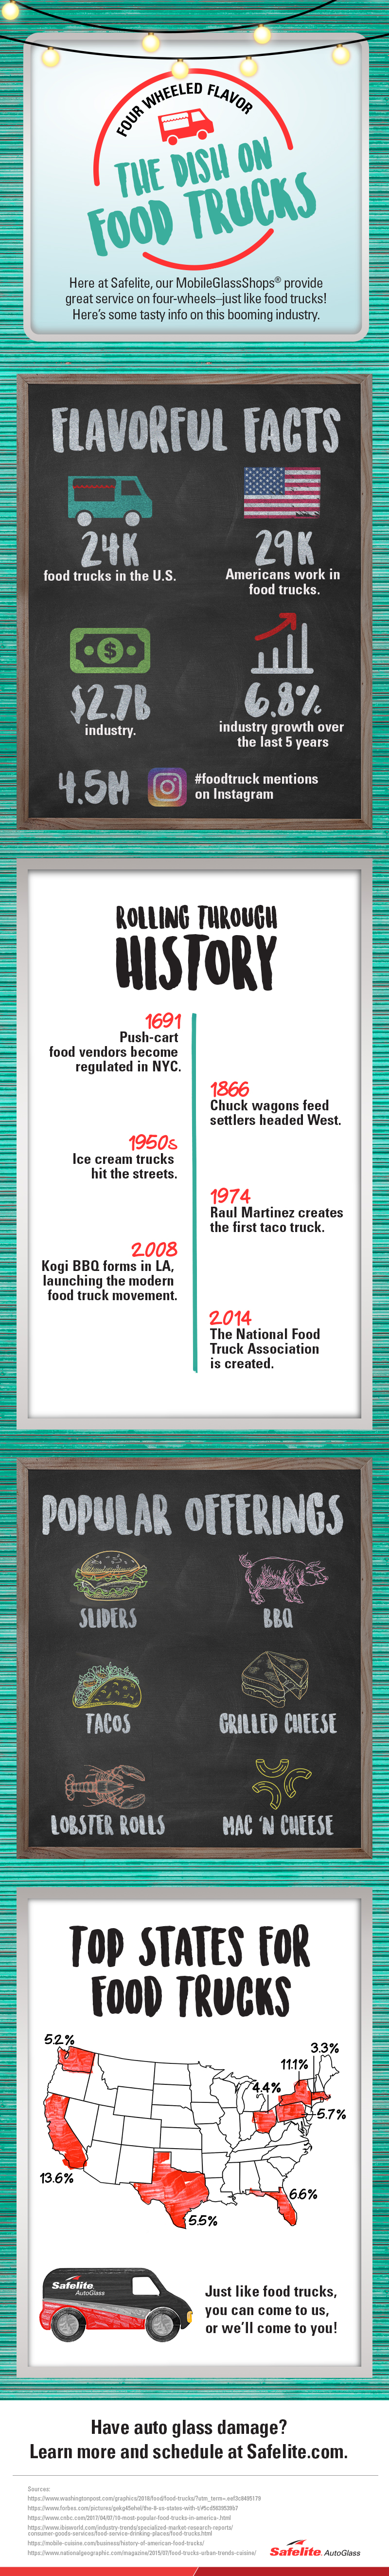 Food truck infographic